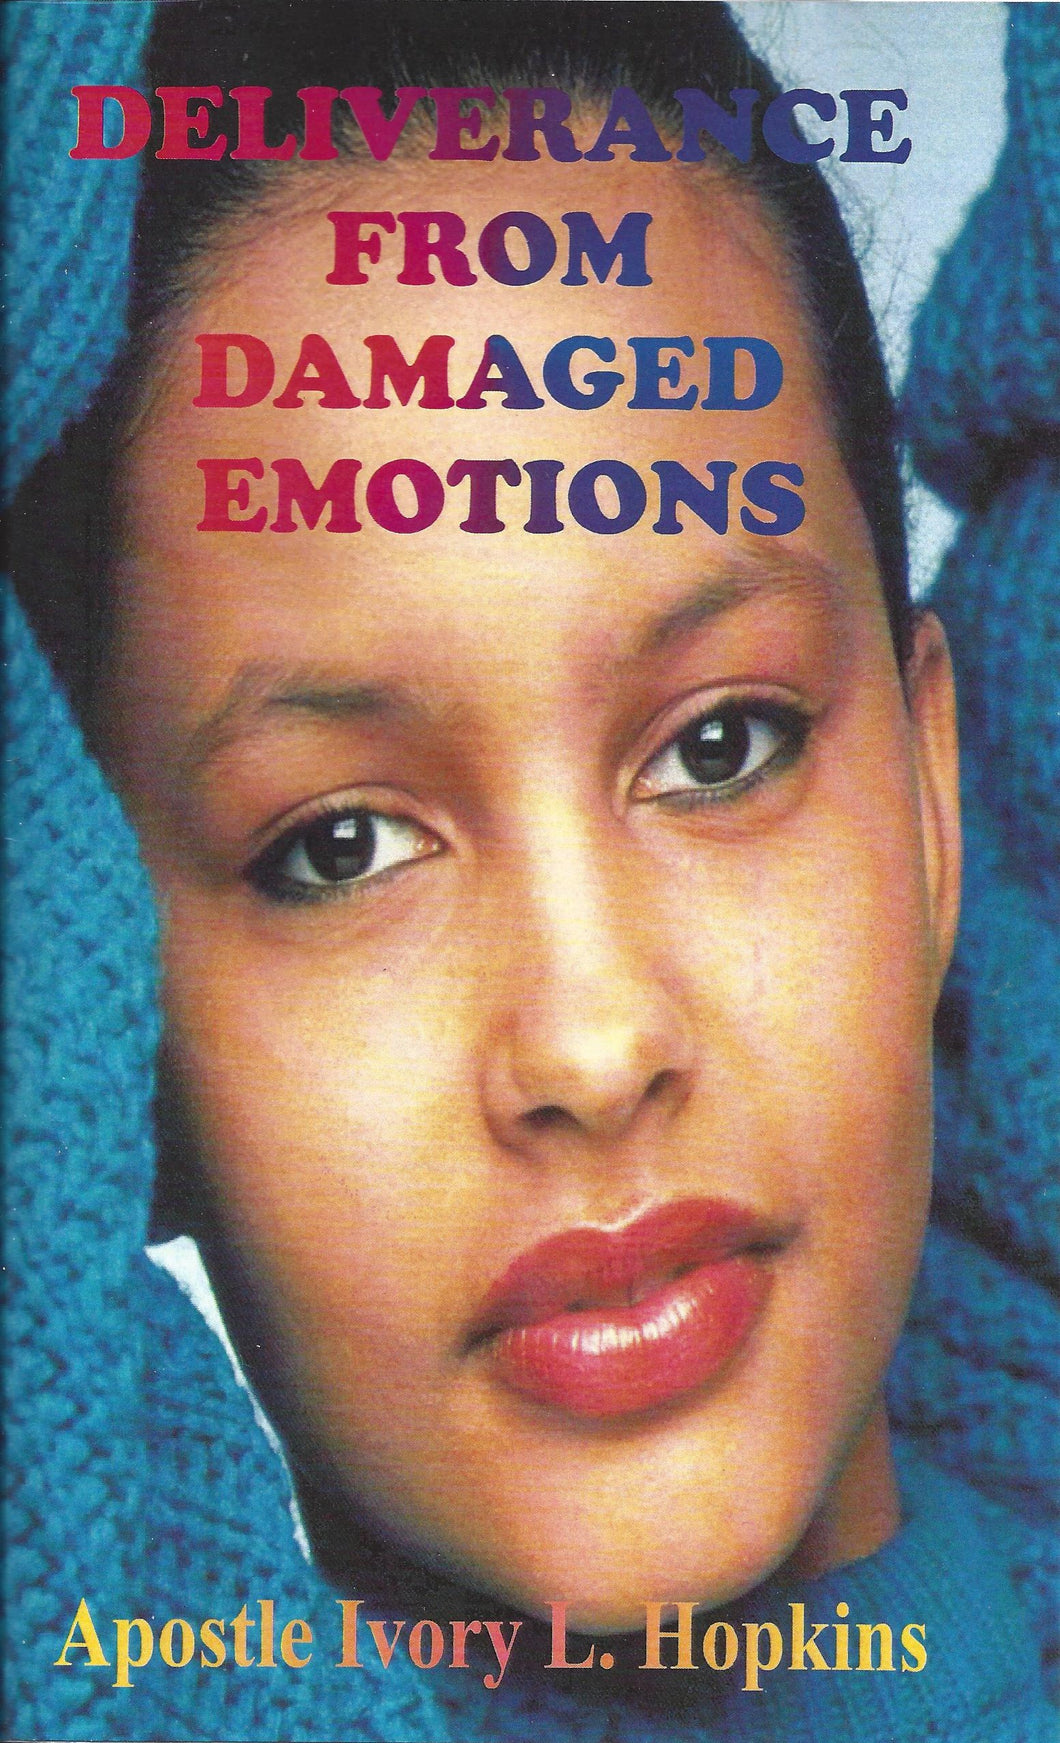 MP3 - 81 - Damaged Emotions and Infirmities